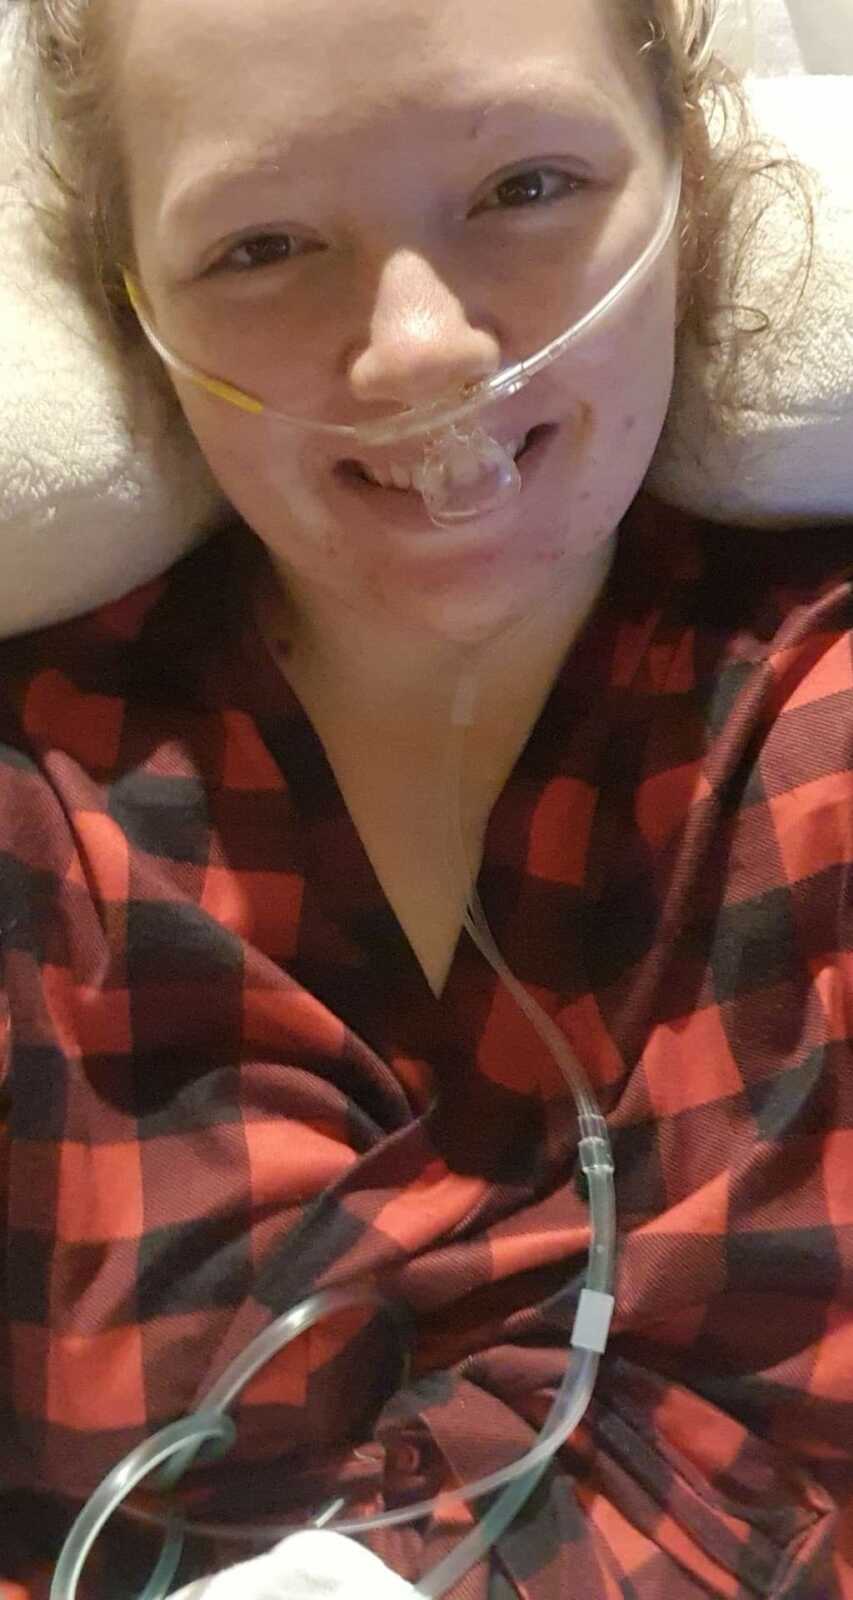 woman smiling in the hospital after surgery